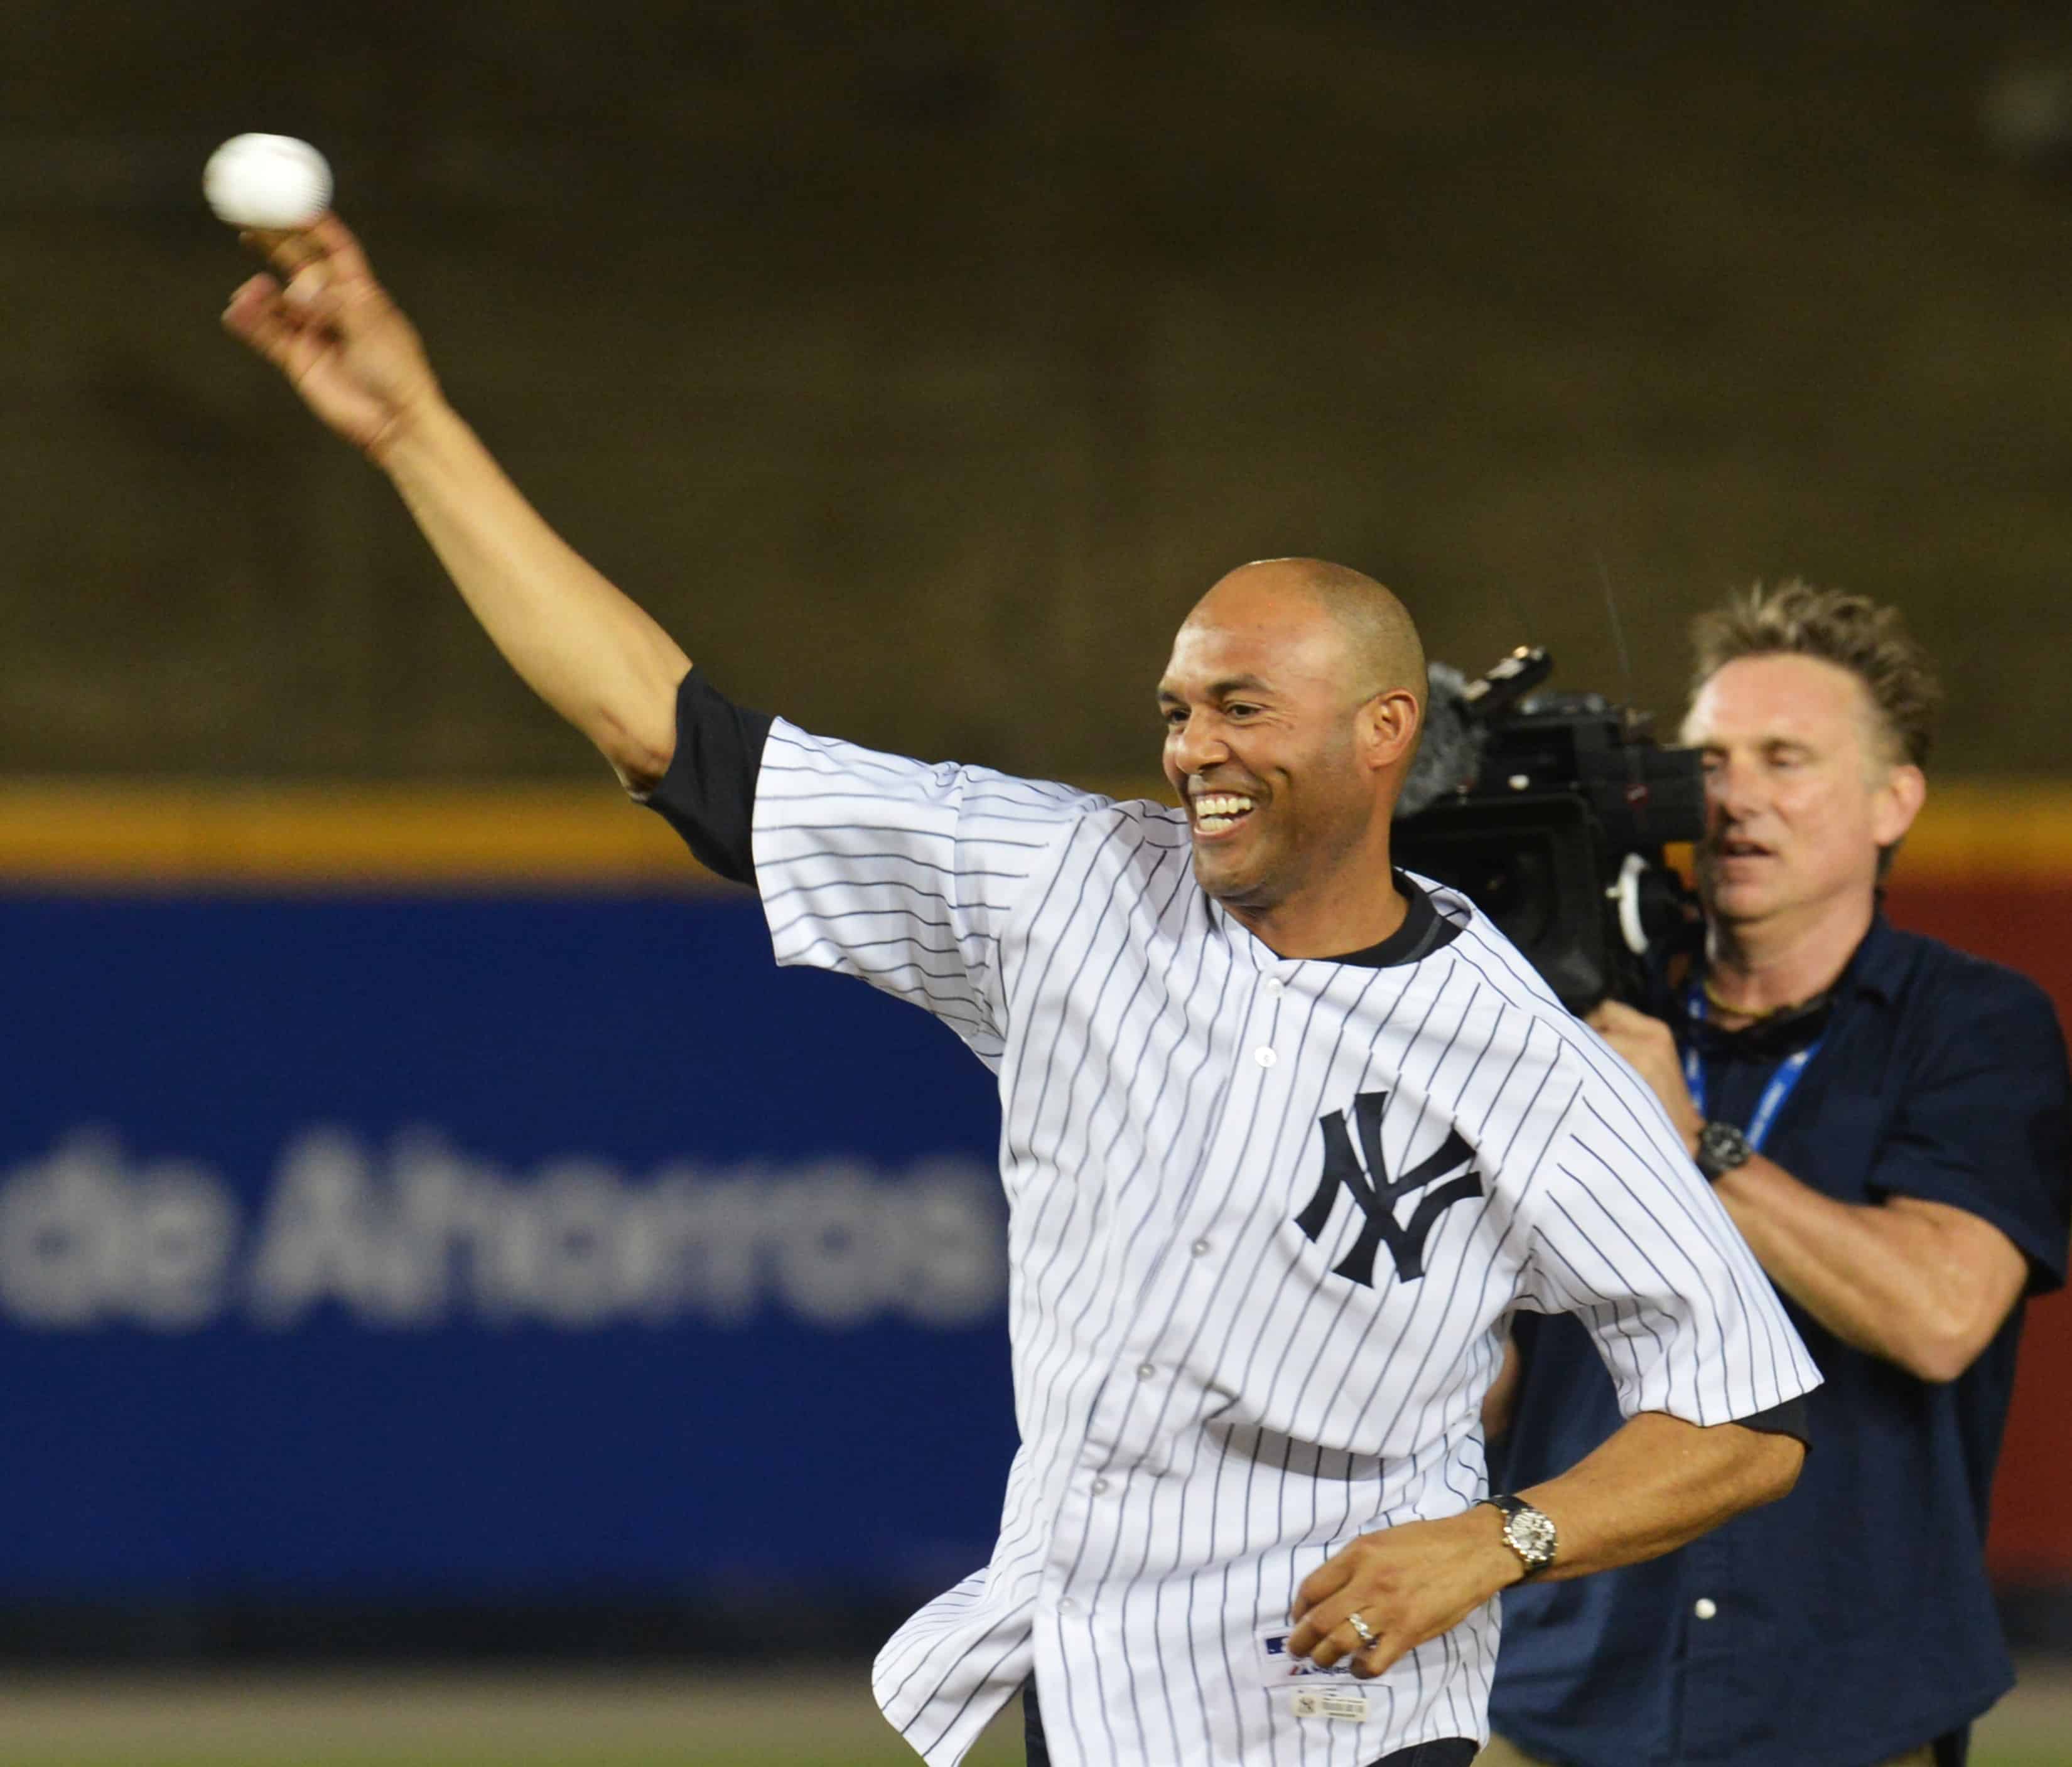 Yankees honor legend Mariano Rivera by bringing Major League Baseball to Panama for first time since 1947